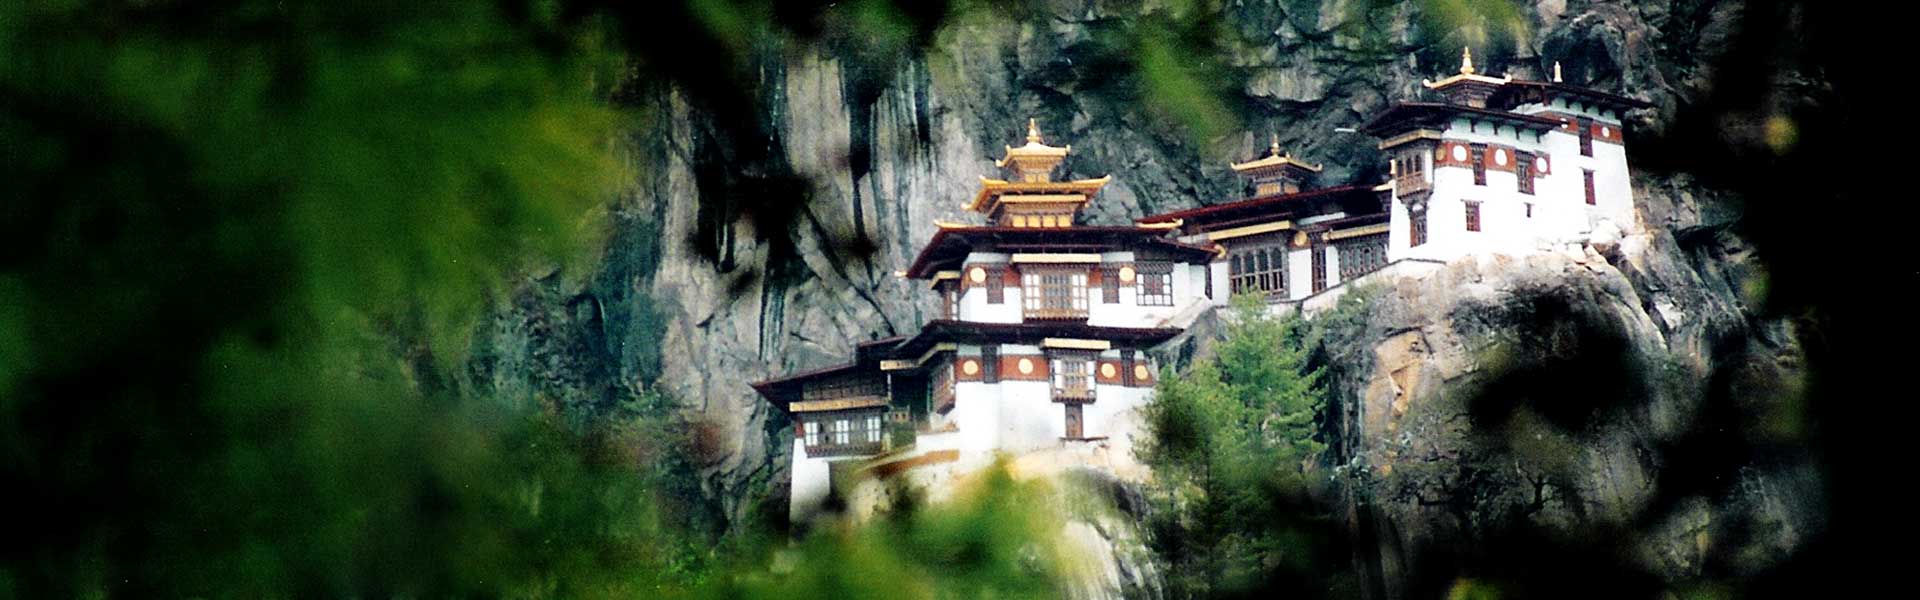 bhutan tour package from usa